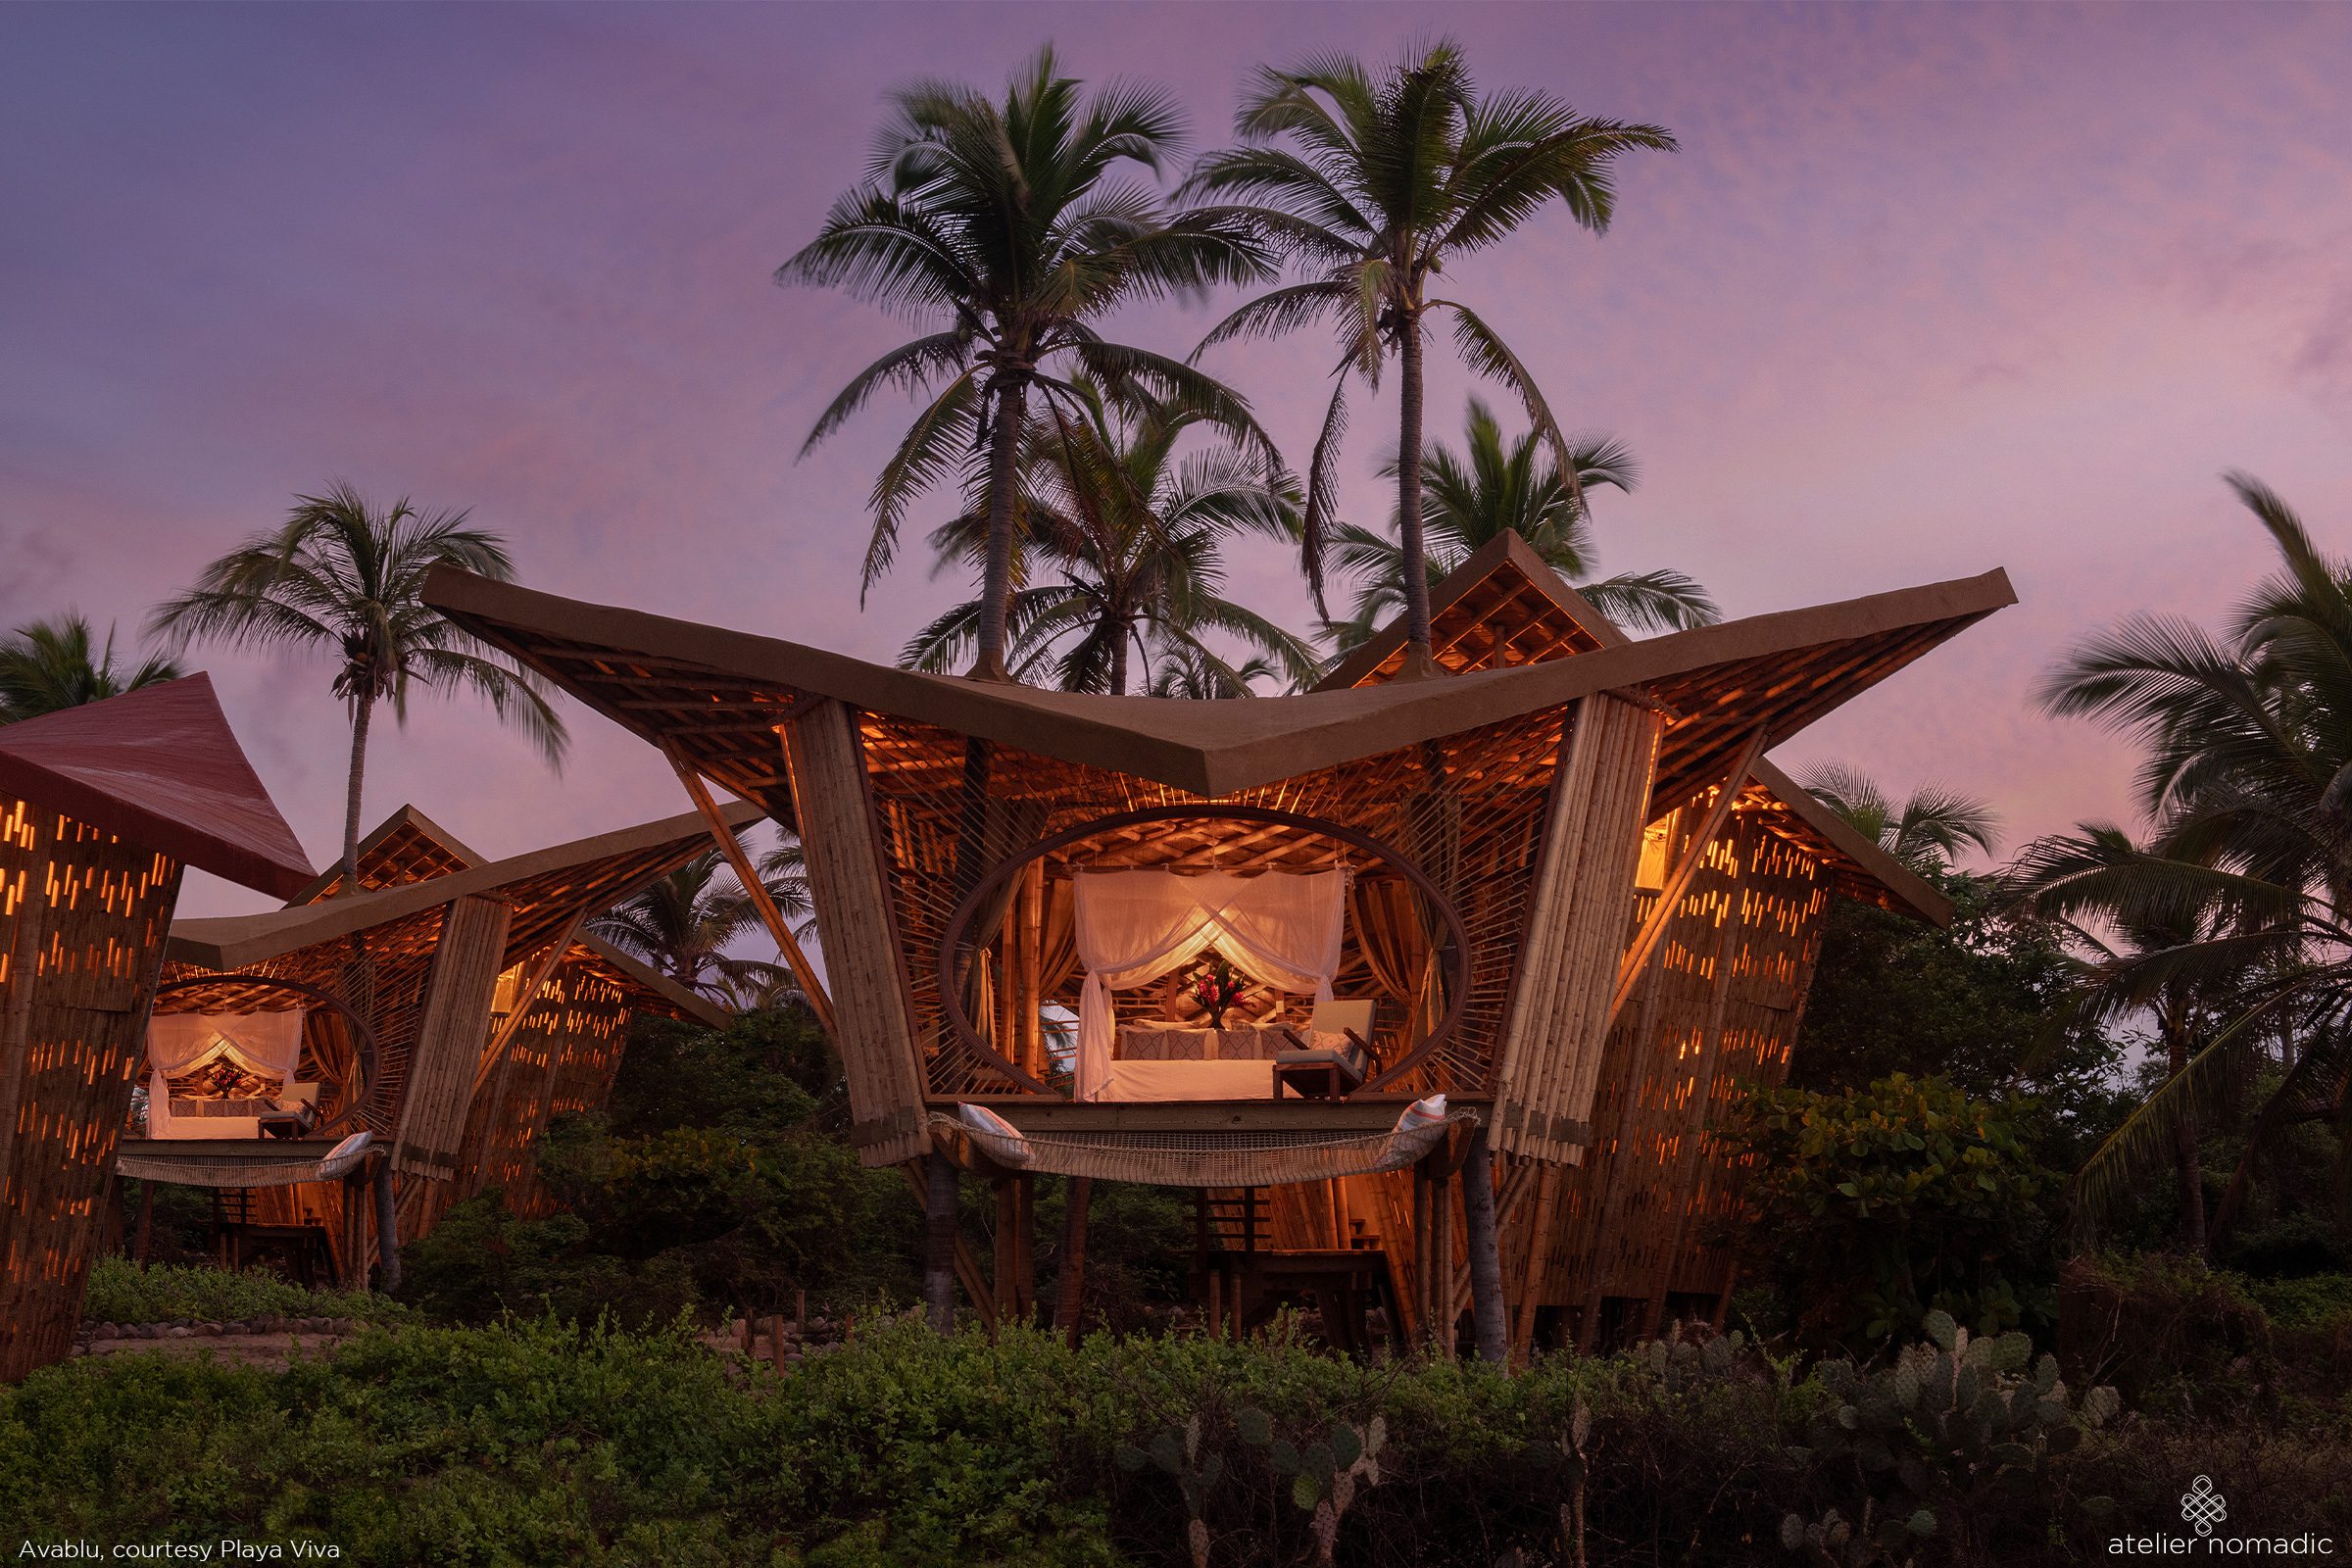 The treehouse at the front includes the master bedroom with a hammock net balcony suspended out towards the sea while the annex treehouse at the rear contains the bathroom downstairs and a second bedroom/lounge upstairs, outfitted with daybeds and a desk area.